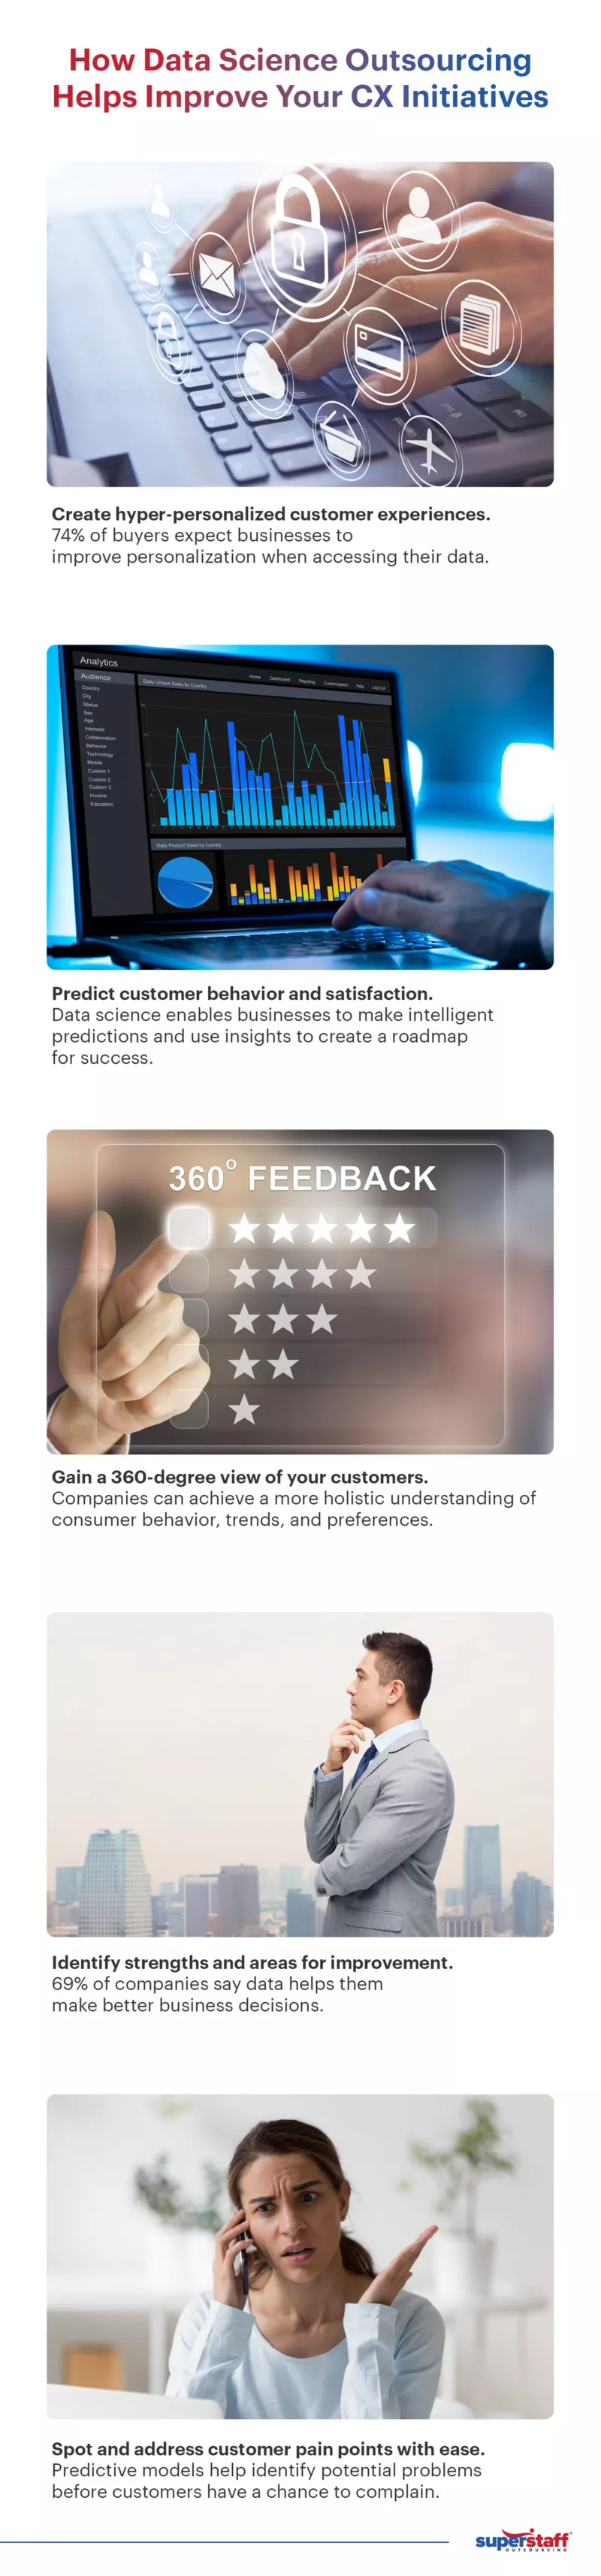 An infographic discussing how data science outsourcing helps revolutionize your customer experience.